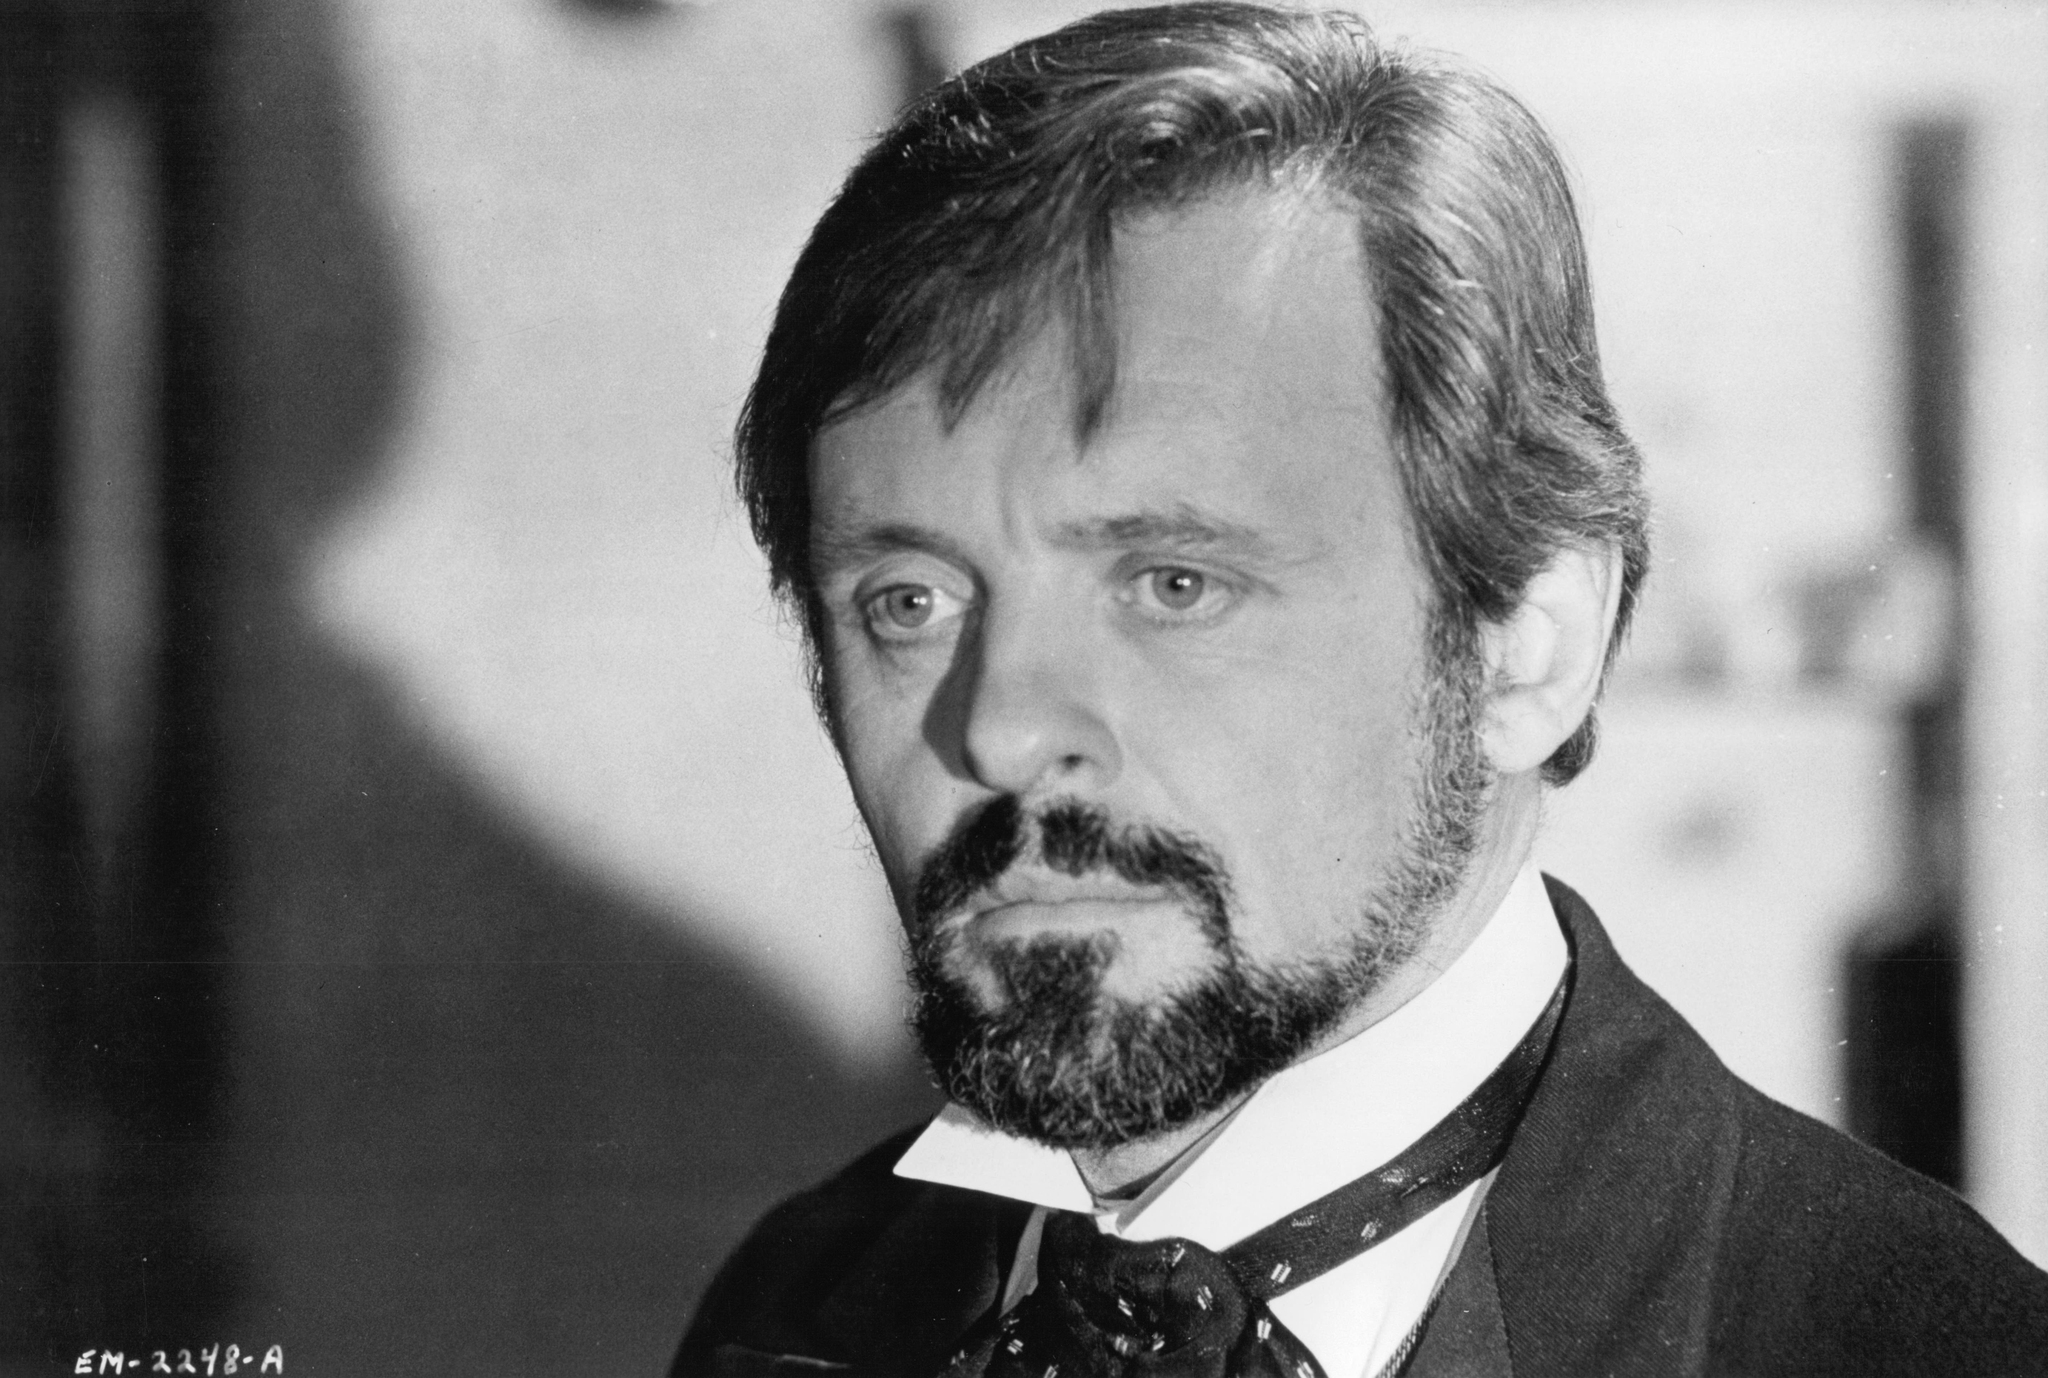 Still of Anthony Hopkins in The Elephant Man (1980)